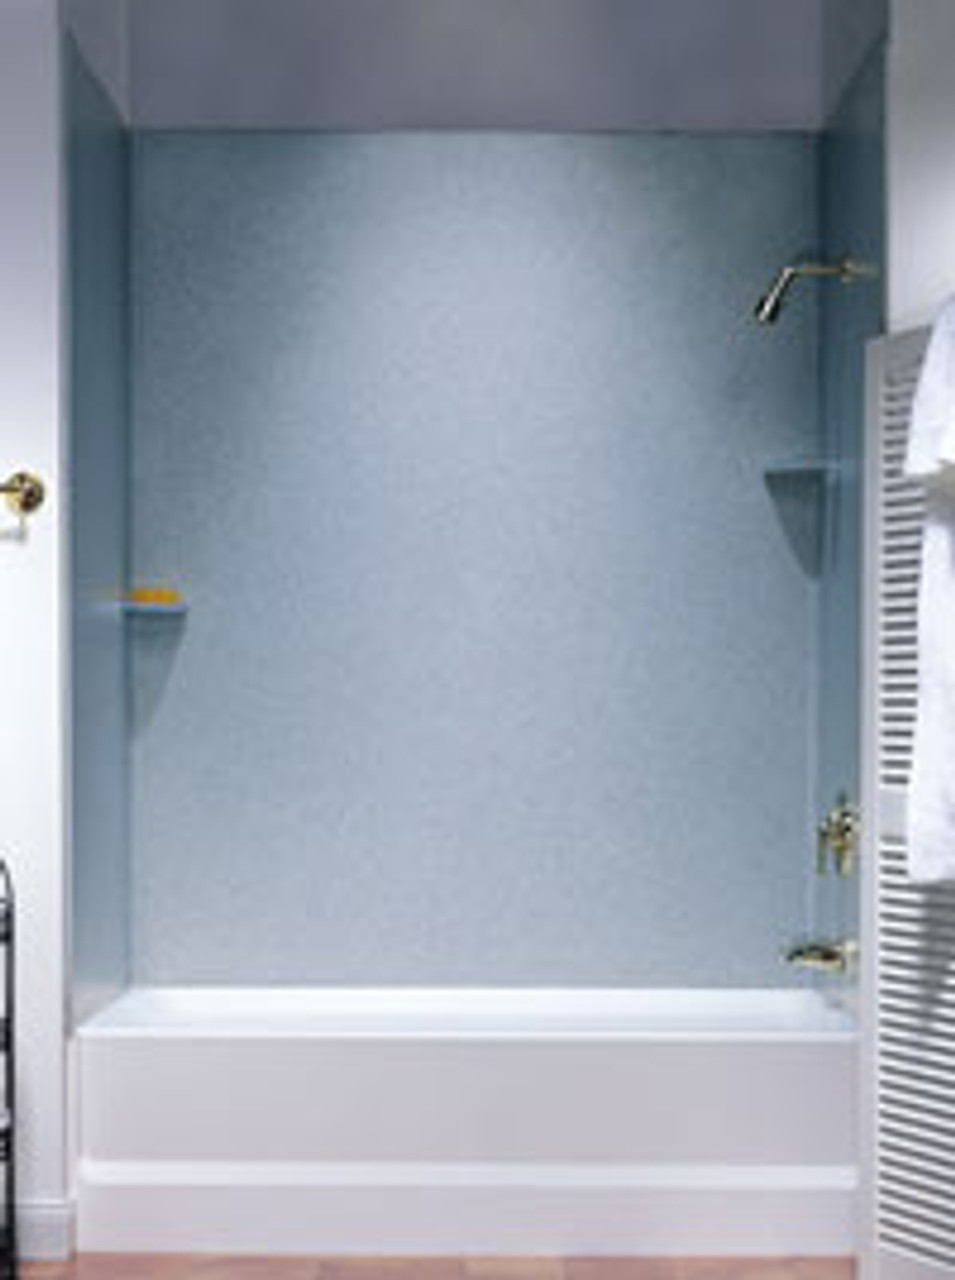 Swanstone Ss 72 3 Bathtub 3 Panel Wall Kit Aggregate Color Swanstone Products Eplumbing Products Inc